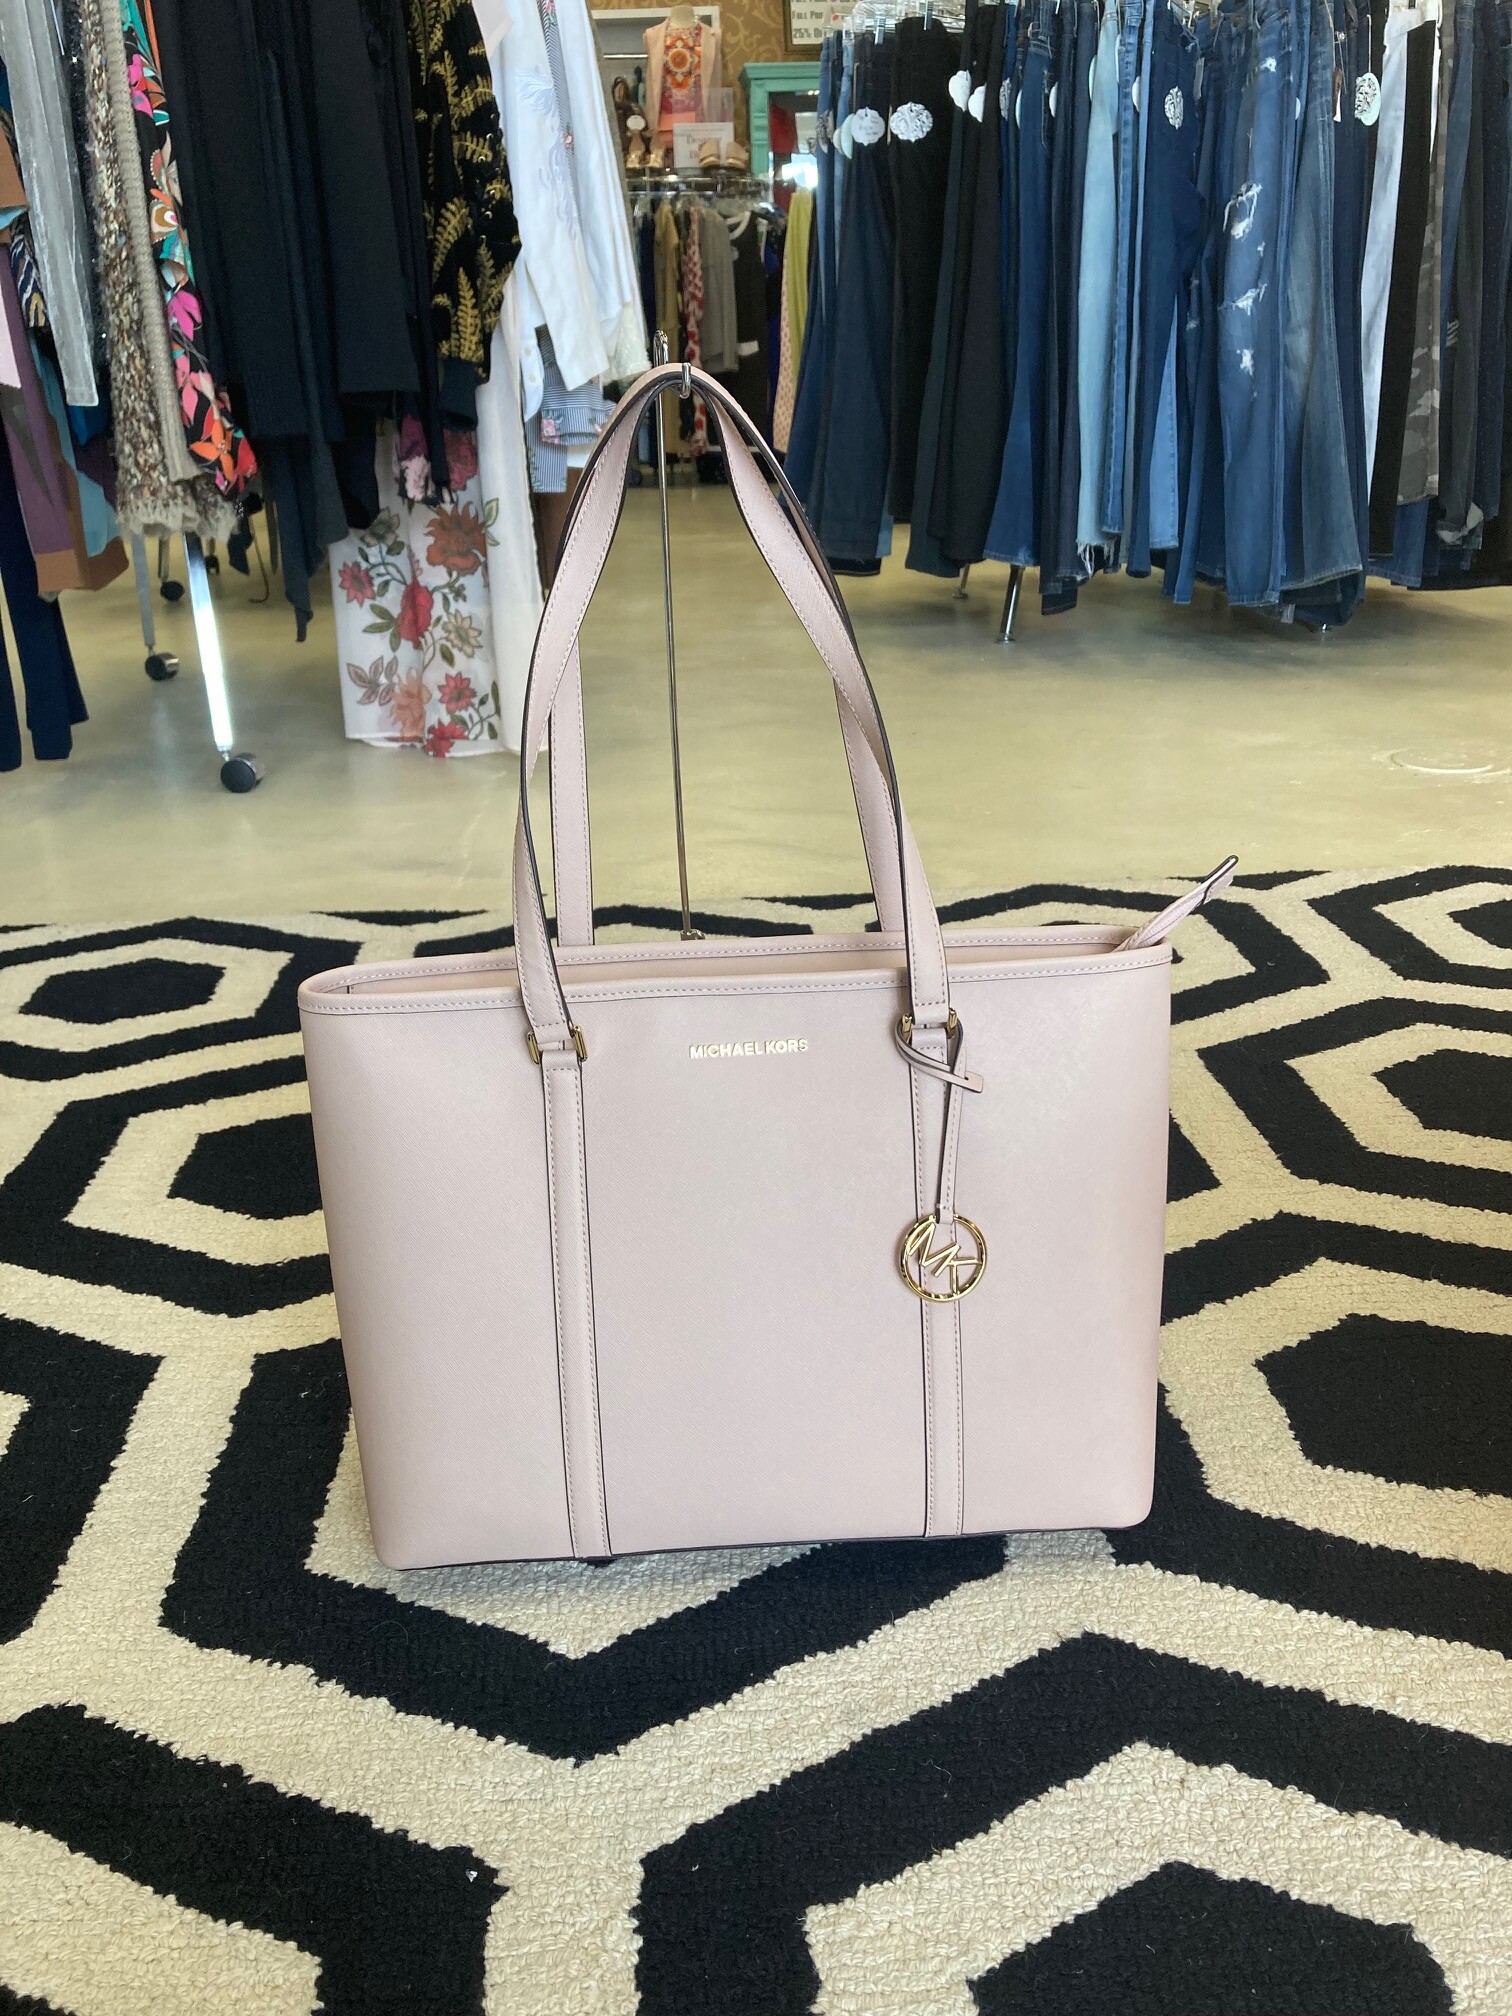 M Kors Purse: Beautiful spring color in perfect condition! Classy Michael Kors style.